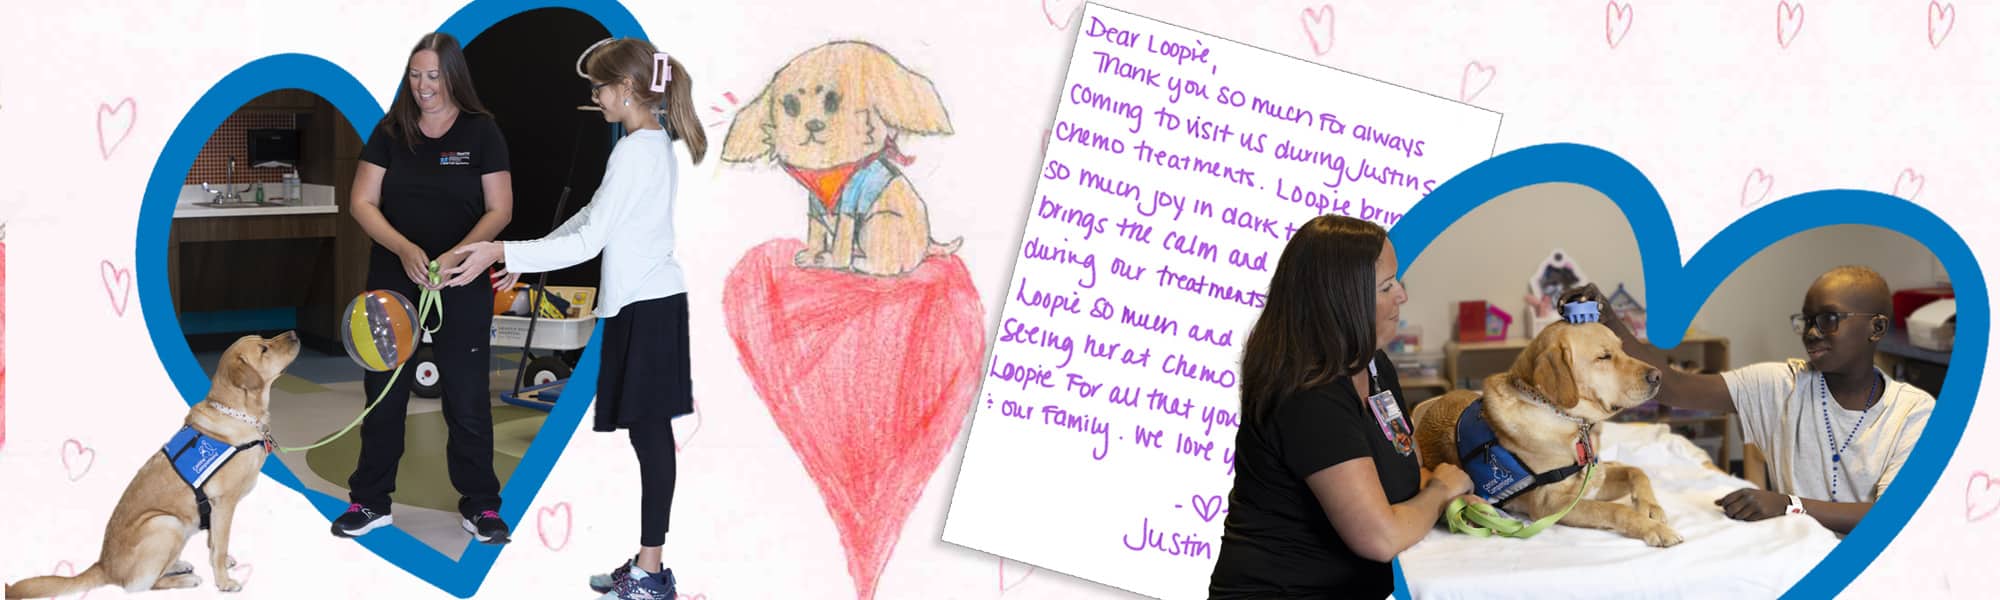 Two service dog teams working in childrens hospitals surrounded by a heart outline. There is an image of a handwritten letter with a hand drawn dog with a heart